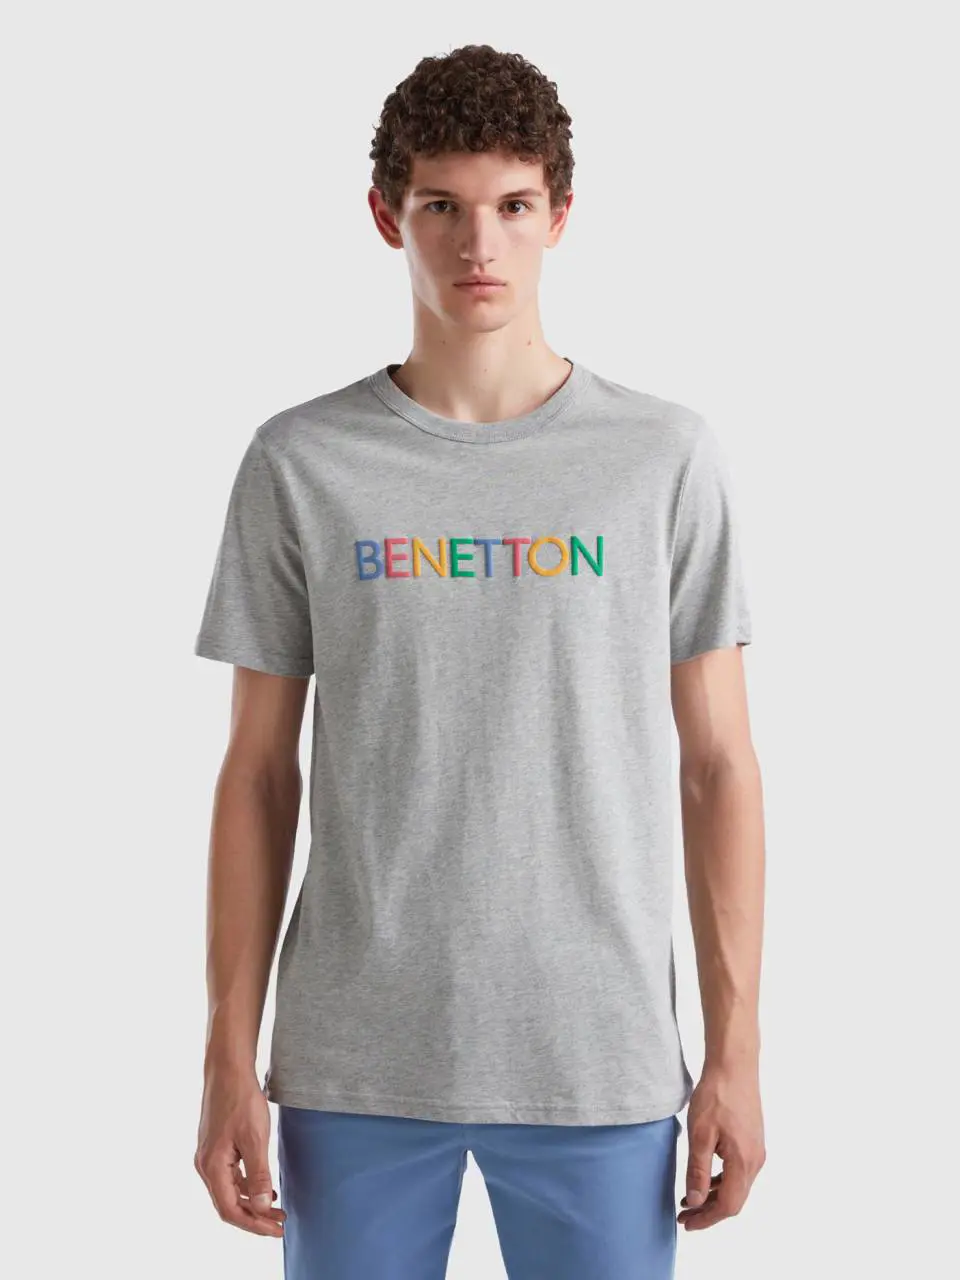 Benetton gray t-shirt in organic cotton with multicolored logo. 1